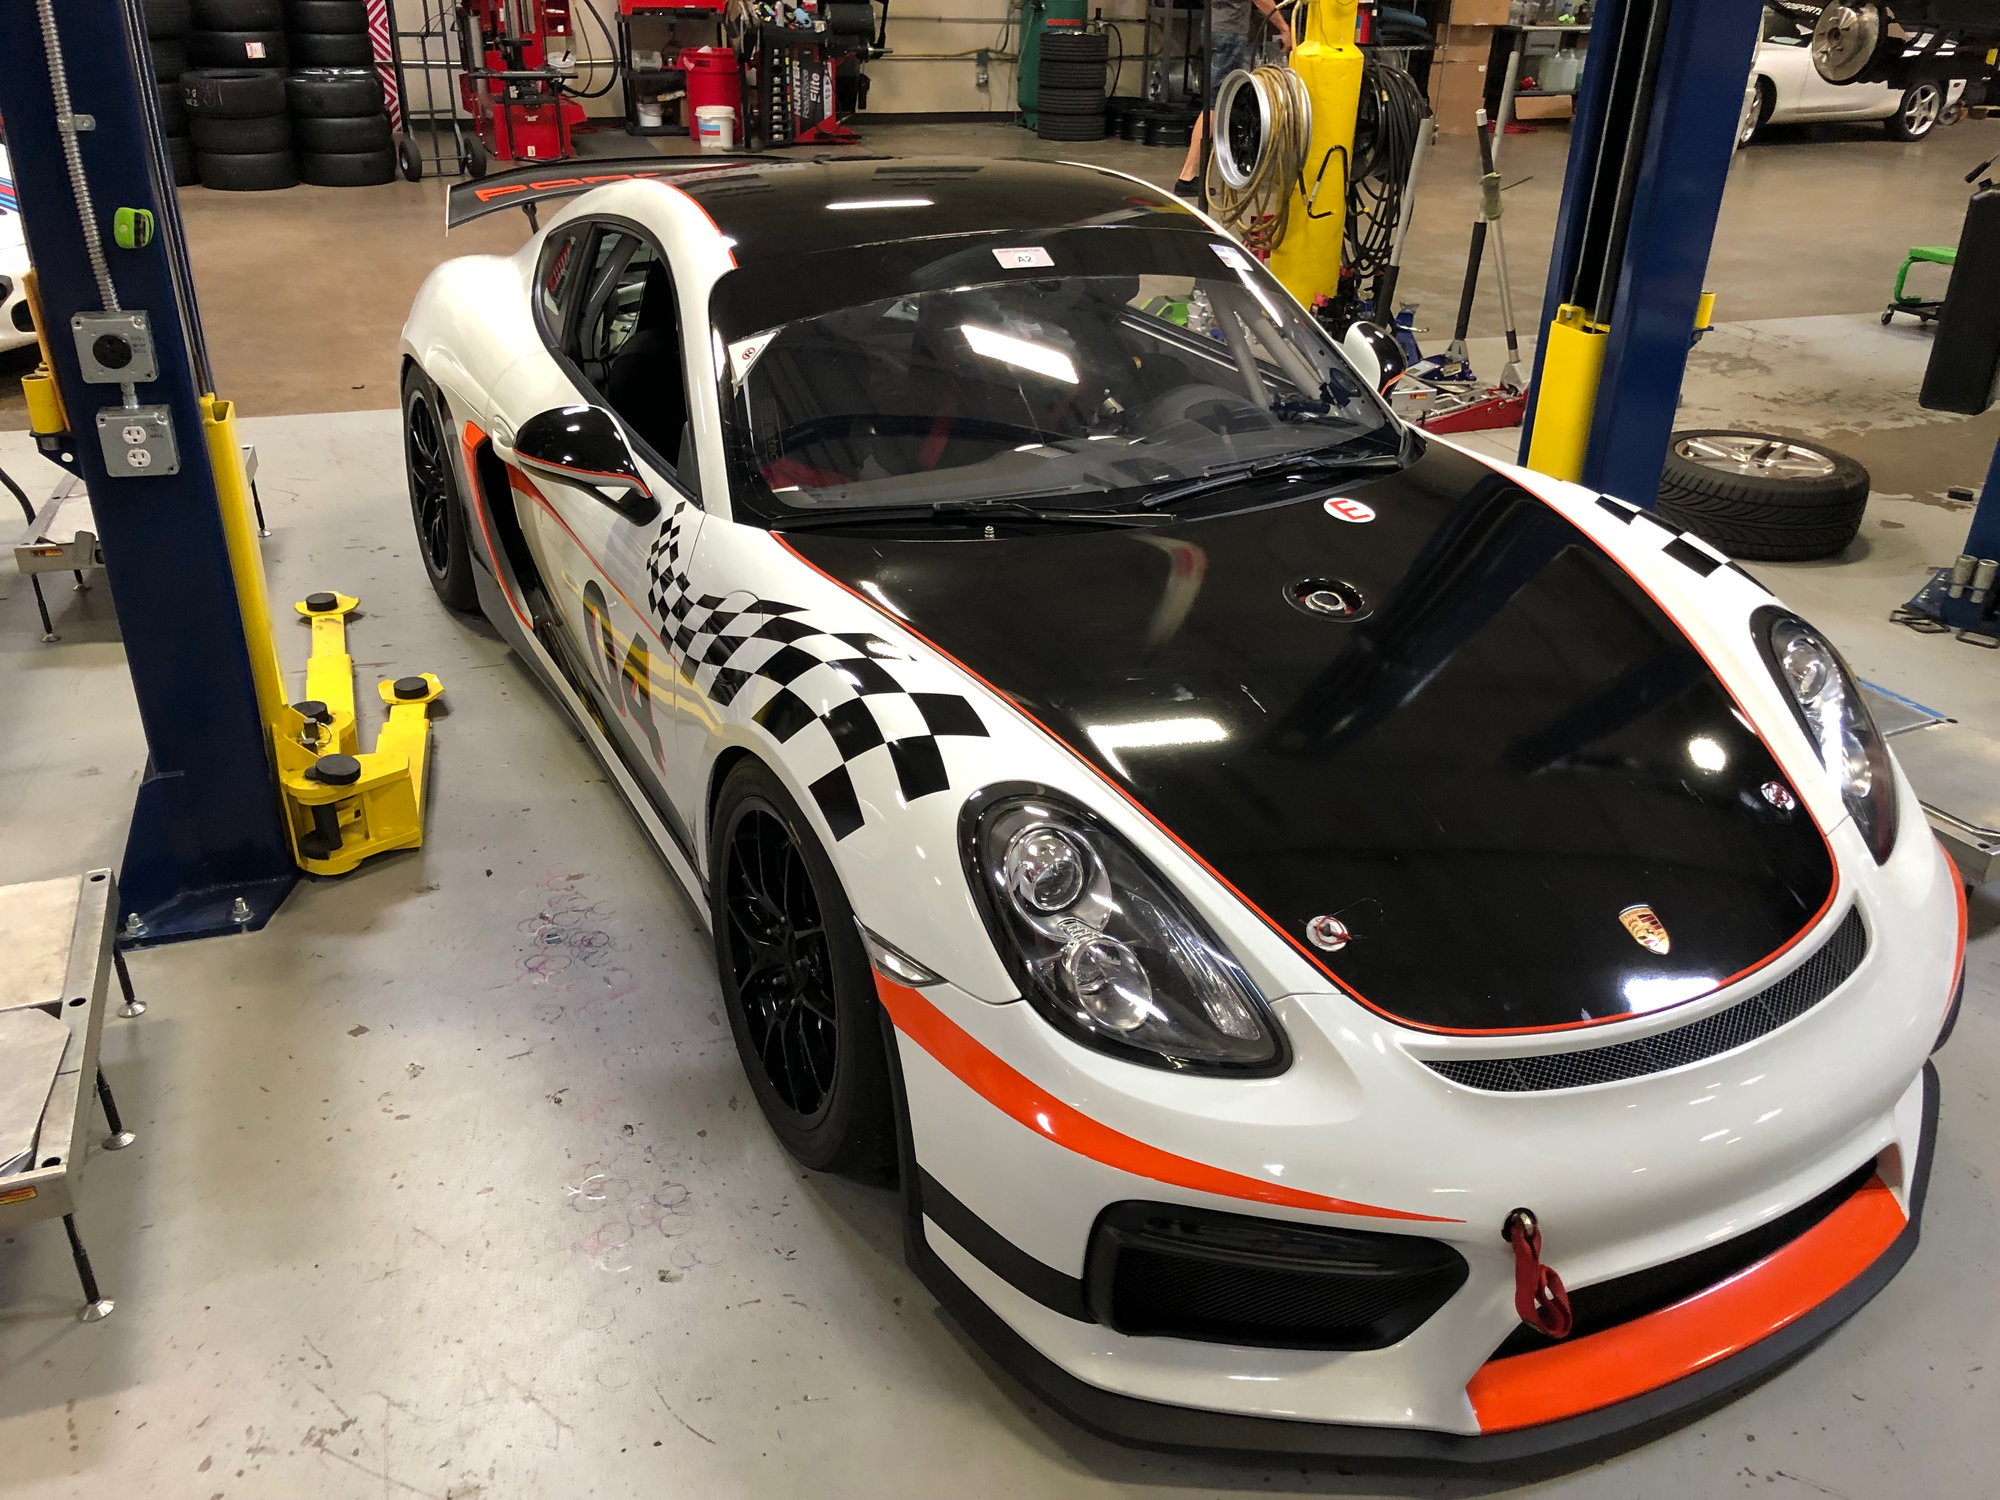 2016 Porsche Cayman GT4 - 2016 Porsche Clubsport GT4 with 100 liter fuel tank! - Used - VIN WP0777987GK19731 - 6 cyl - 2WD - Automatic - Coupe - White - Austin, TX 78758, United States